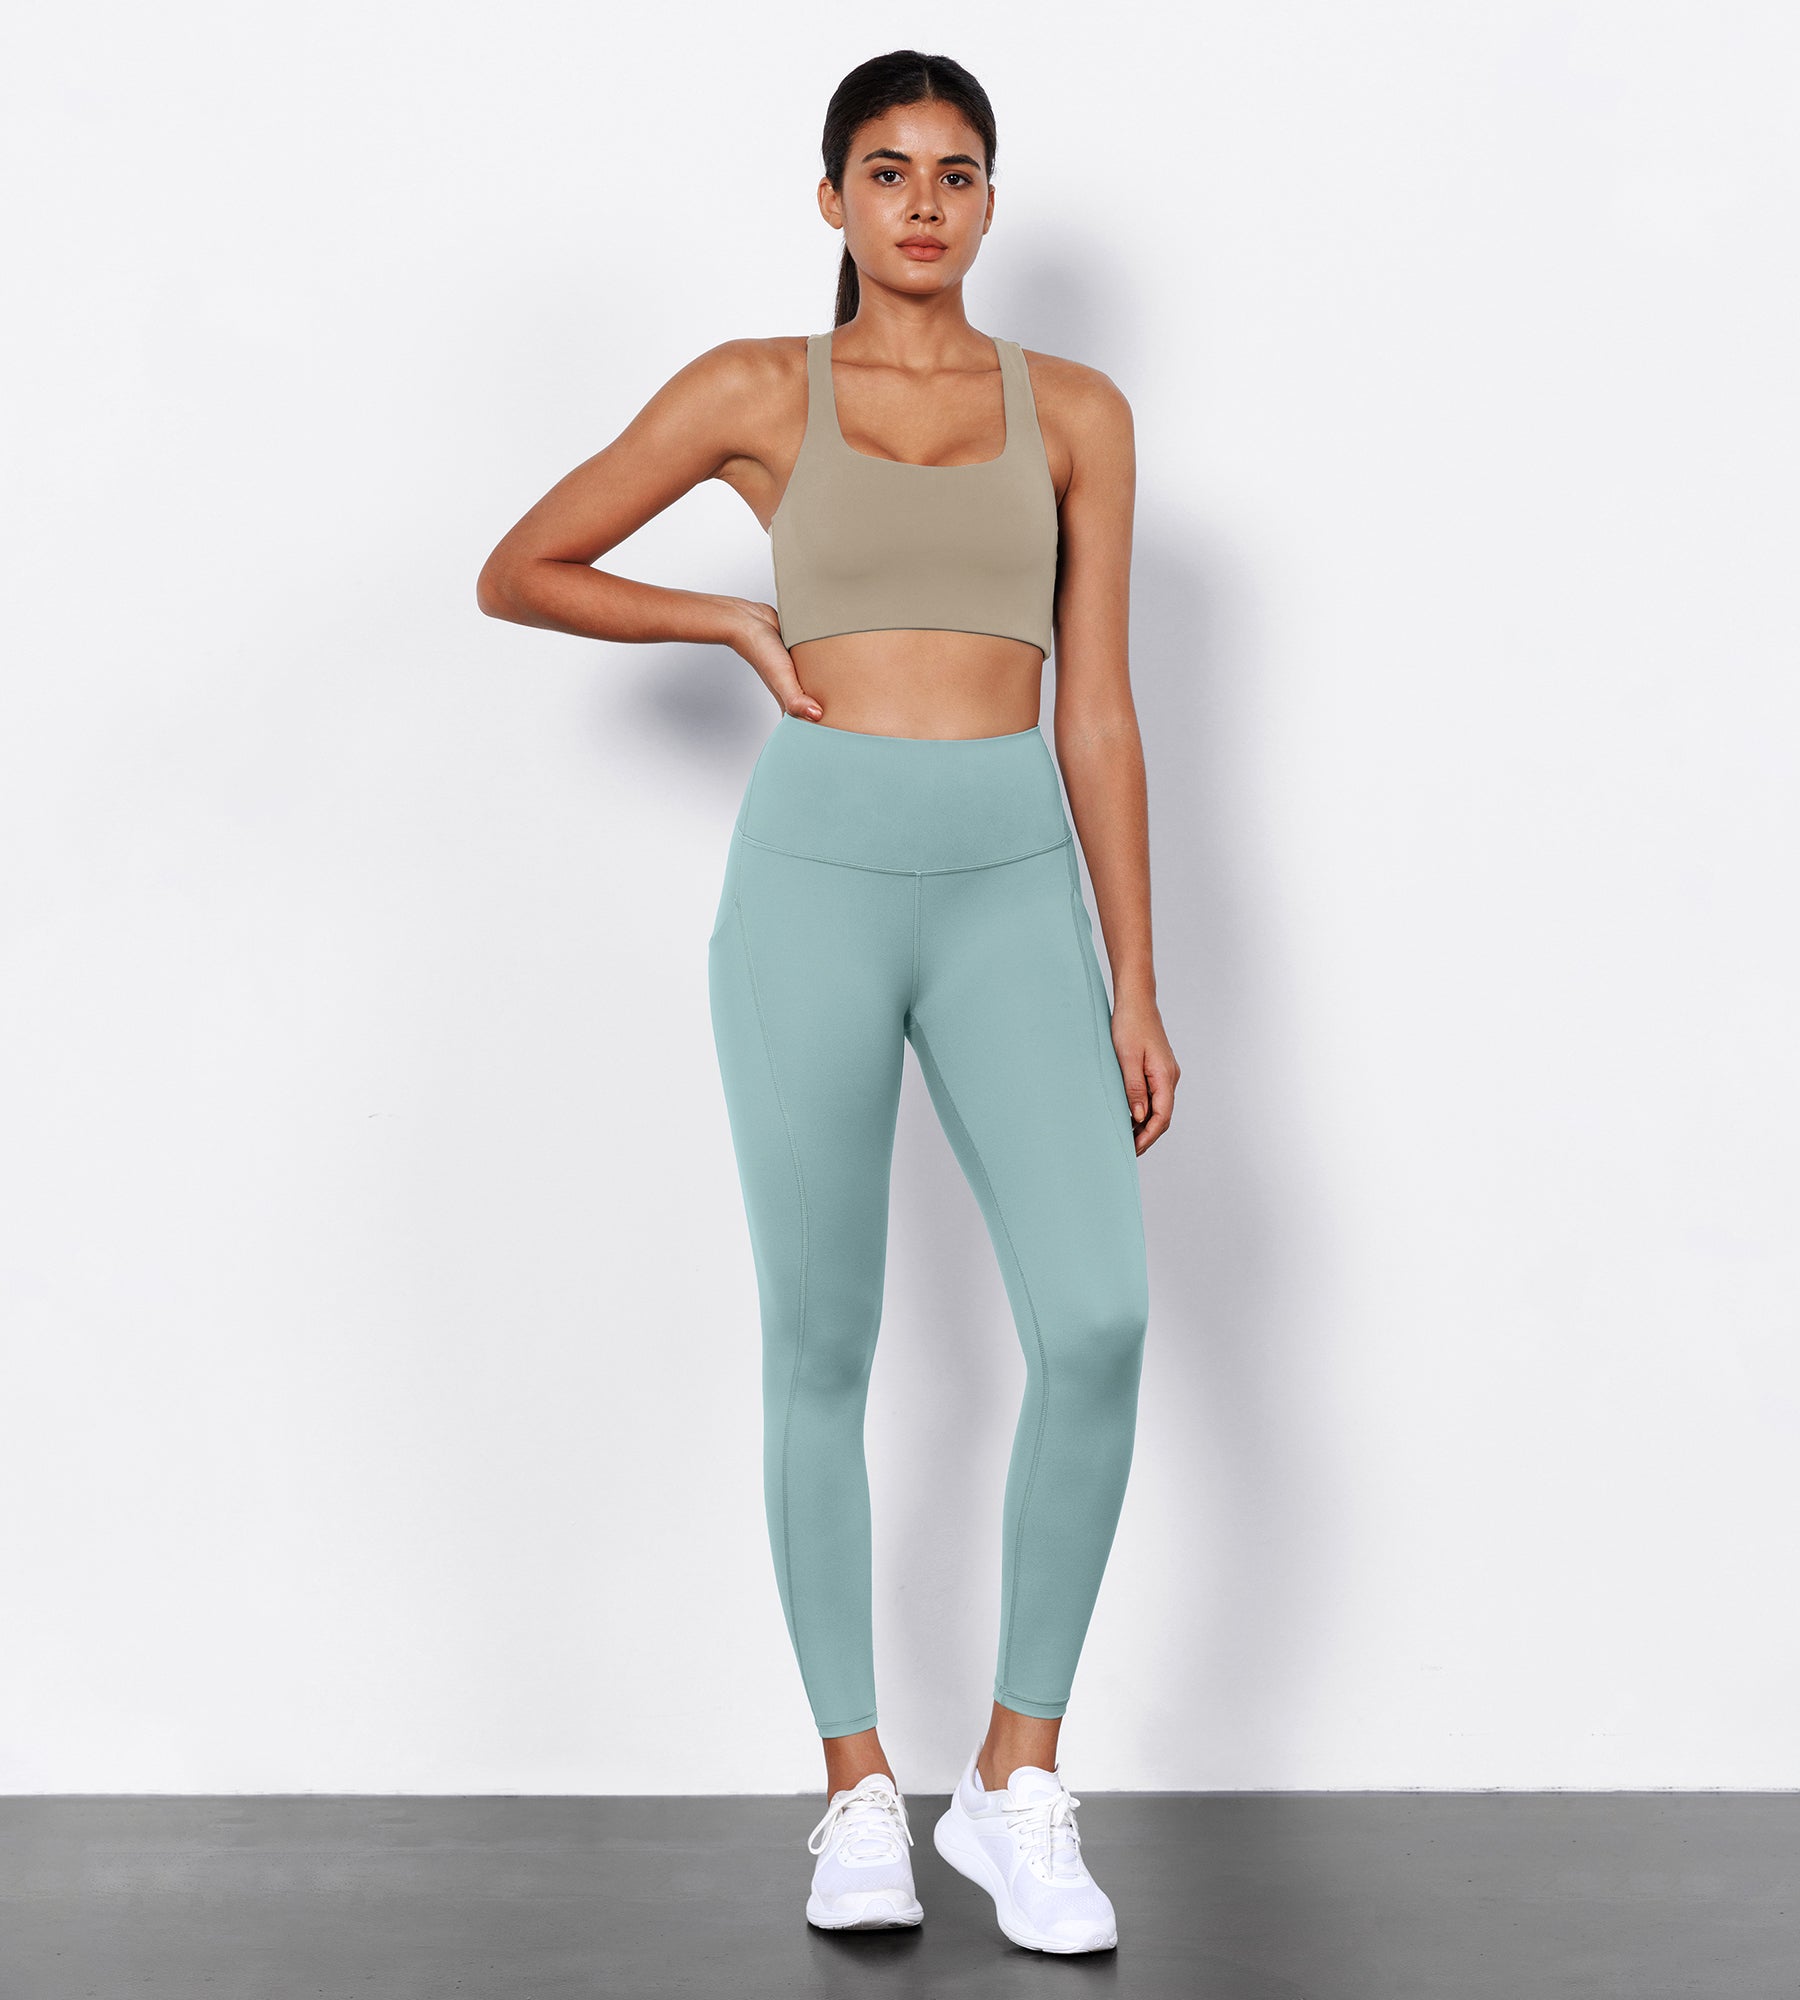 2-Pack 7/8 High Waist Workout Leggings with Pockets Black+Chambray - ododos